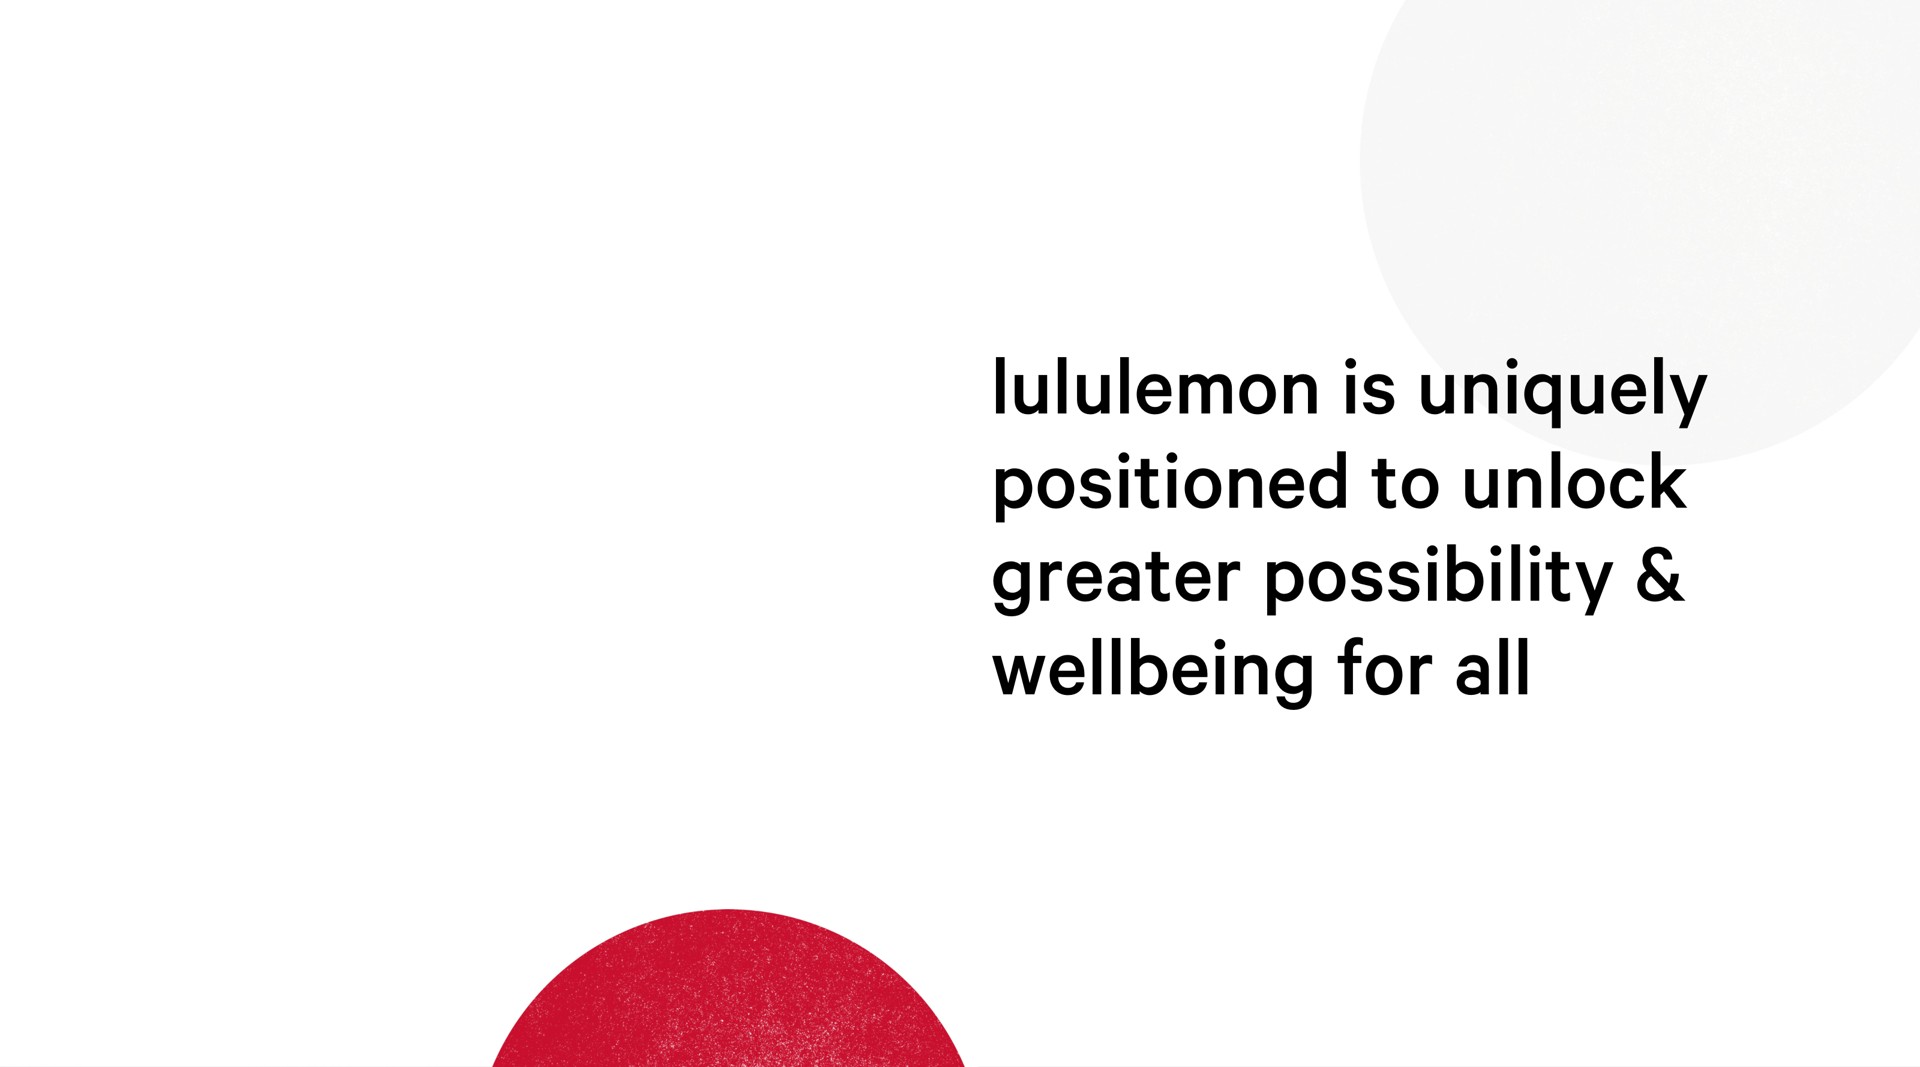 is uniquely positioned to unlock greater possibility for all | Lululemon